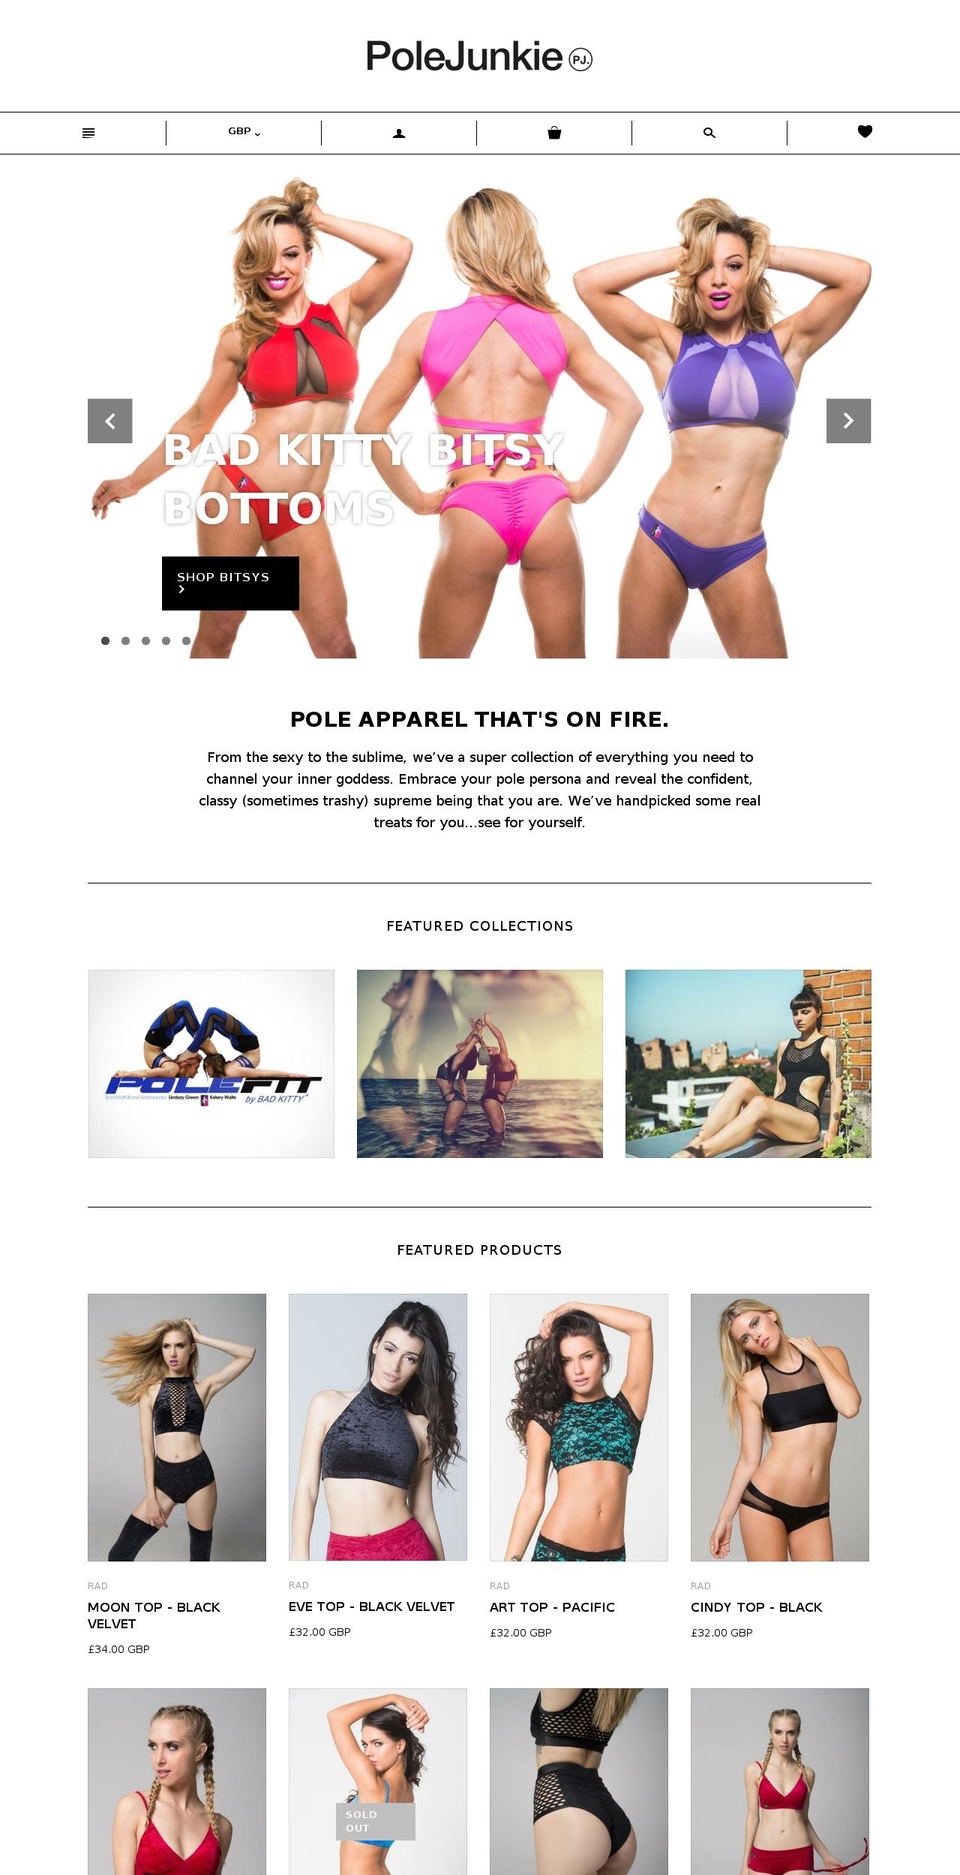 Launch Shopify theme site example polejunkie.co.uk